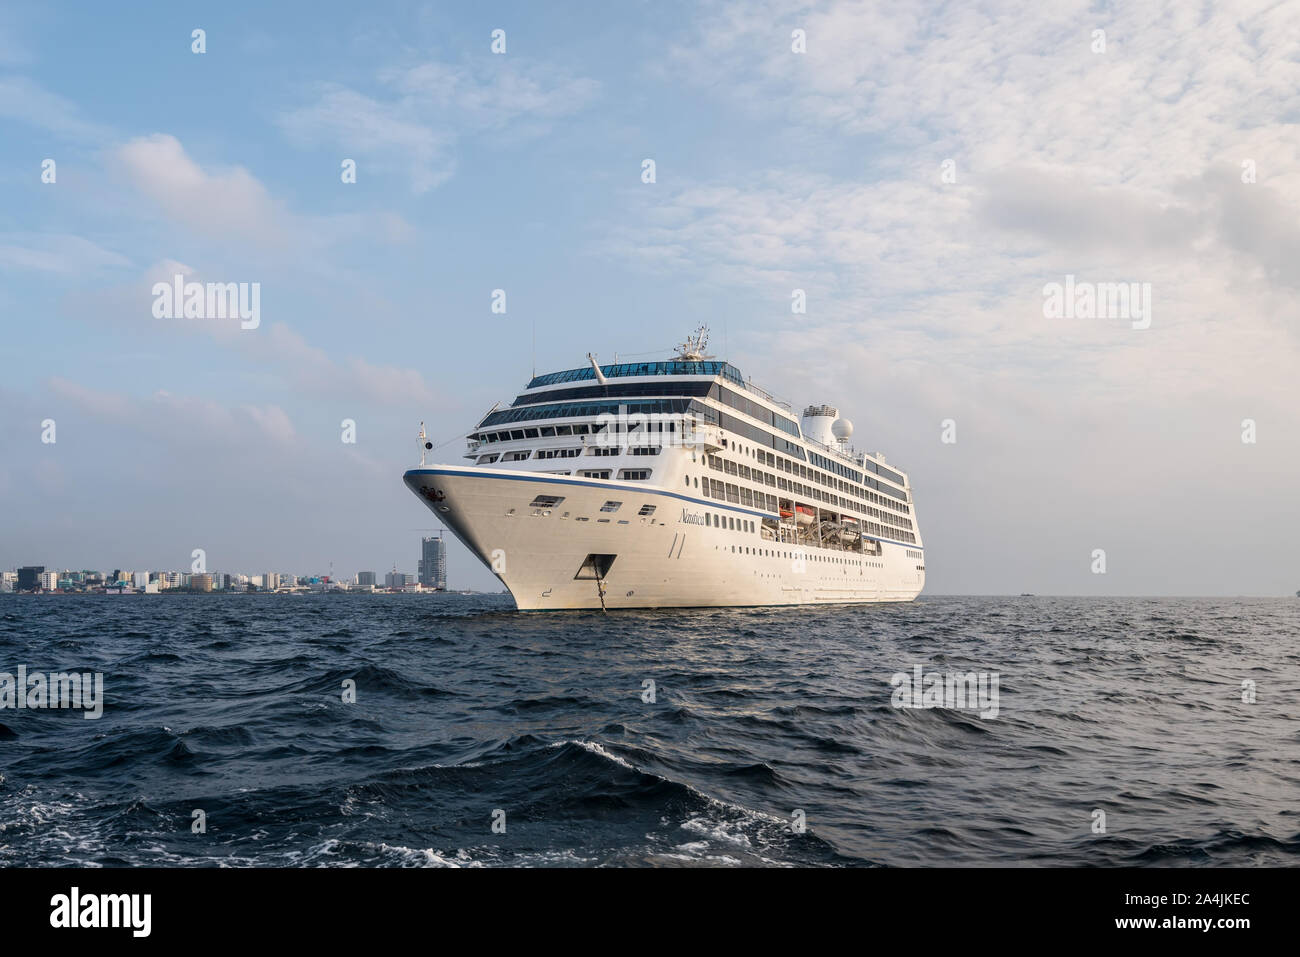 Male, Maldives - November 17, 2017: Oceania Cruises Nautica Cruise Ship is anchored in the outer harbor of Male island as seen from the boat in Maldiv Stock Photo